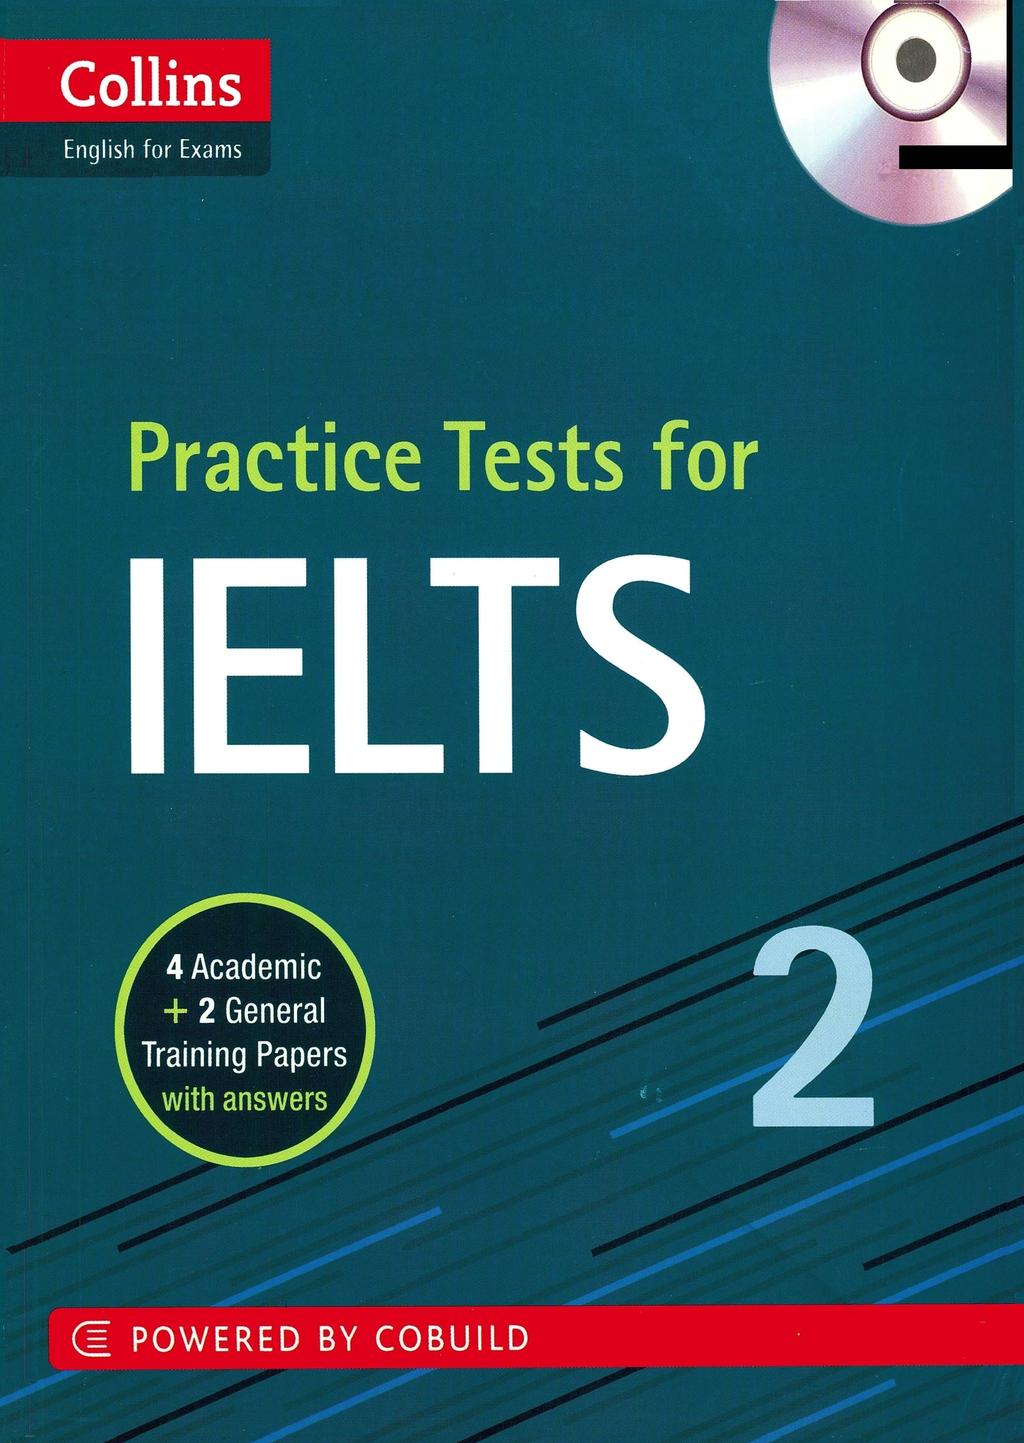 Collins English for Exams. Practice Tests for   PDF Free Download